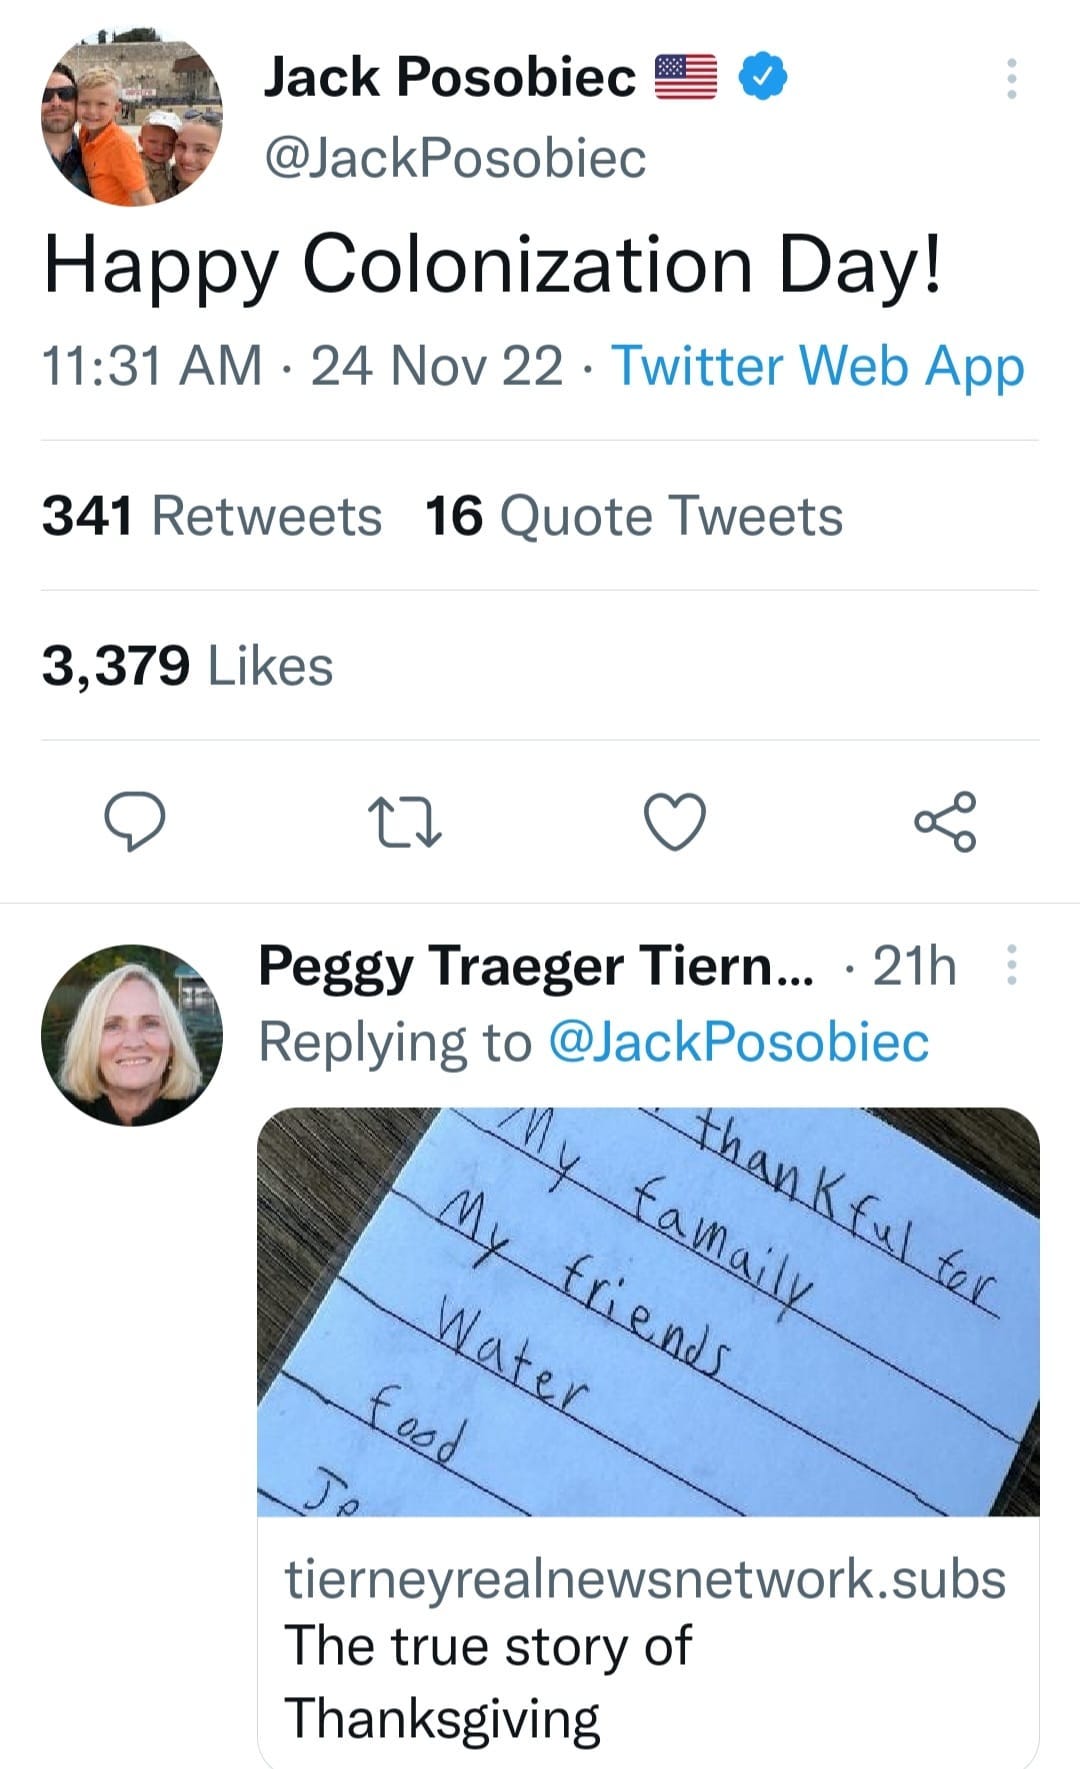 May be a Twitter screenshot of 3 people and text that says 'Jack Posobiec @JackPosobiec Happy Colonization Day! 11:31 AM 24 Nov 22 Twitter Web App 341 Retweets 16 Quote Tweets 3,379 Likes Peggy Traeger Tiern... 21h Replying to @JackPosobiec -hankalLa 0o0 tierneyrealnewsnetwork.subs The true story of Thanksgiving'